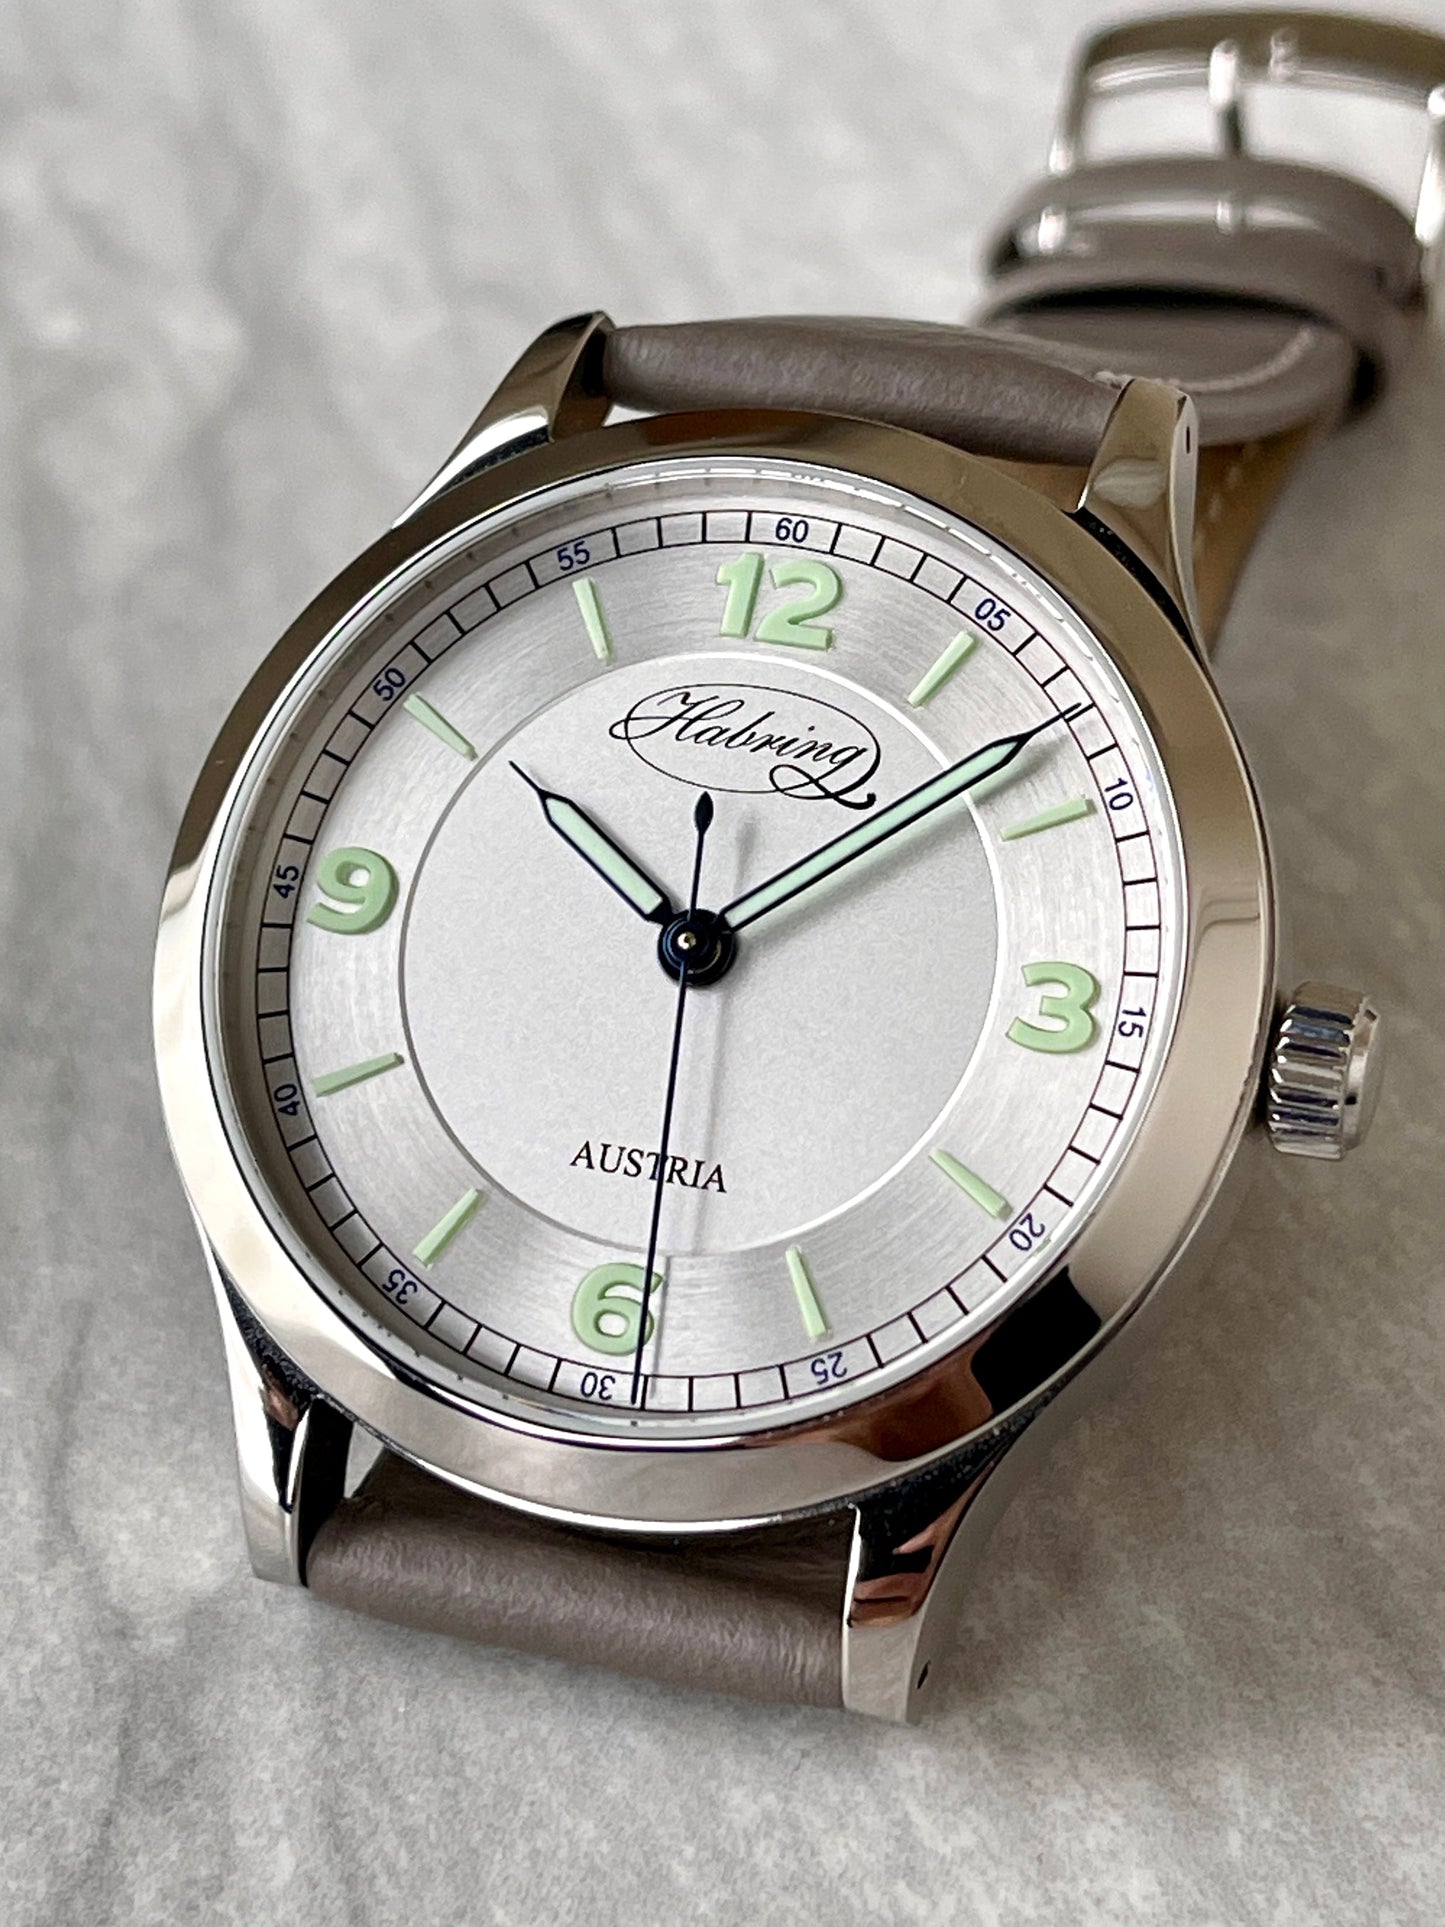 HABRING² Steel Grand Erwin Passion 10th Anniversary Special Edition